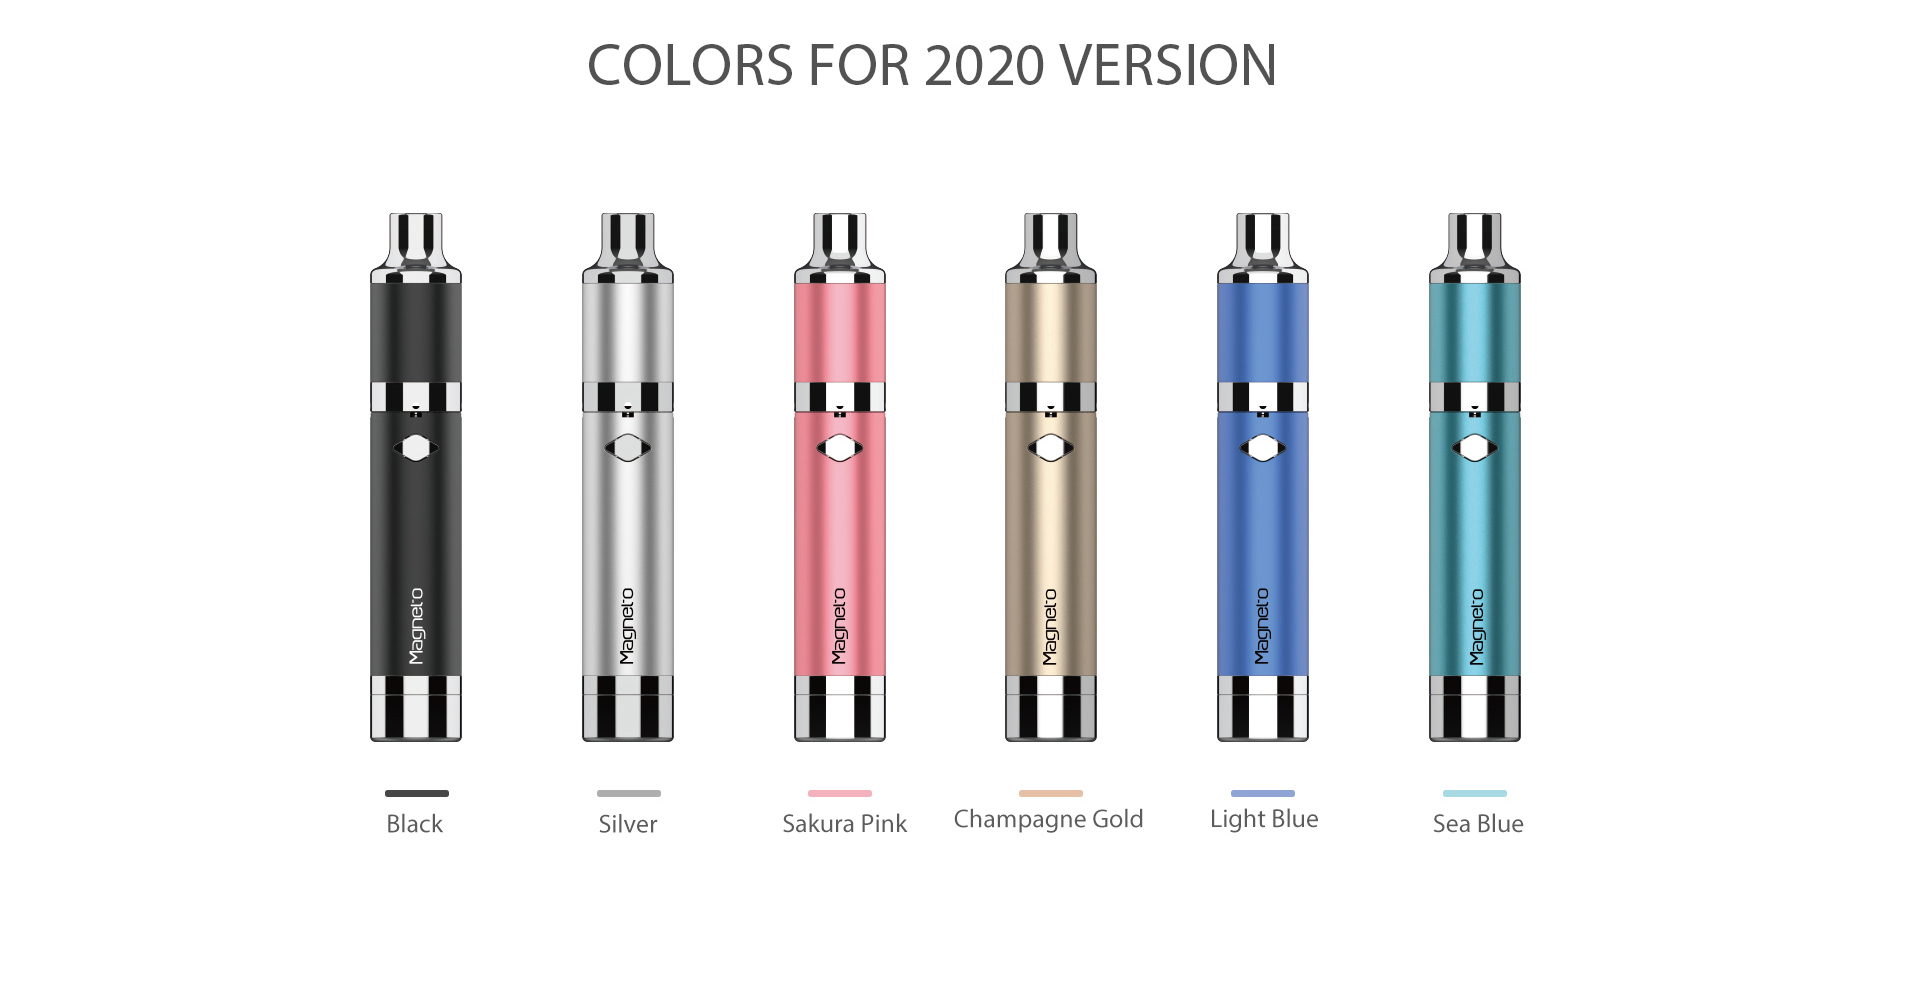 Yocan Magneto concentrate vaporizer pen 2020 version has 6 new colors.